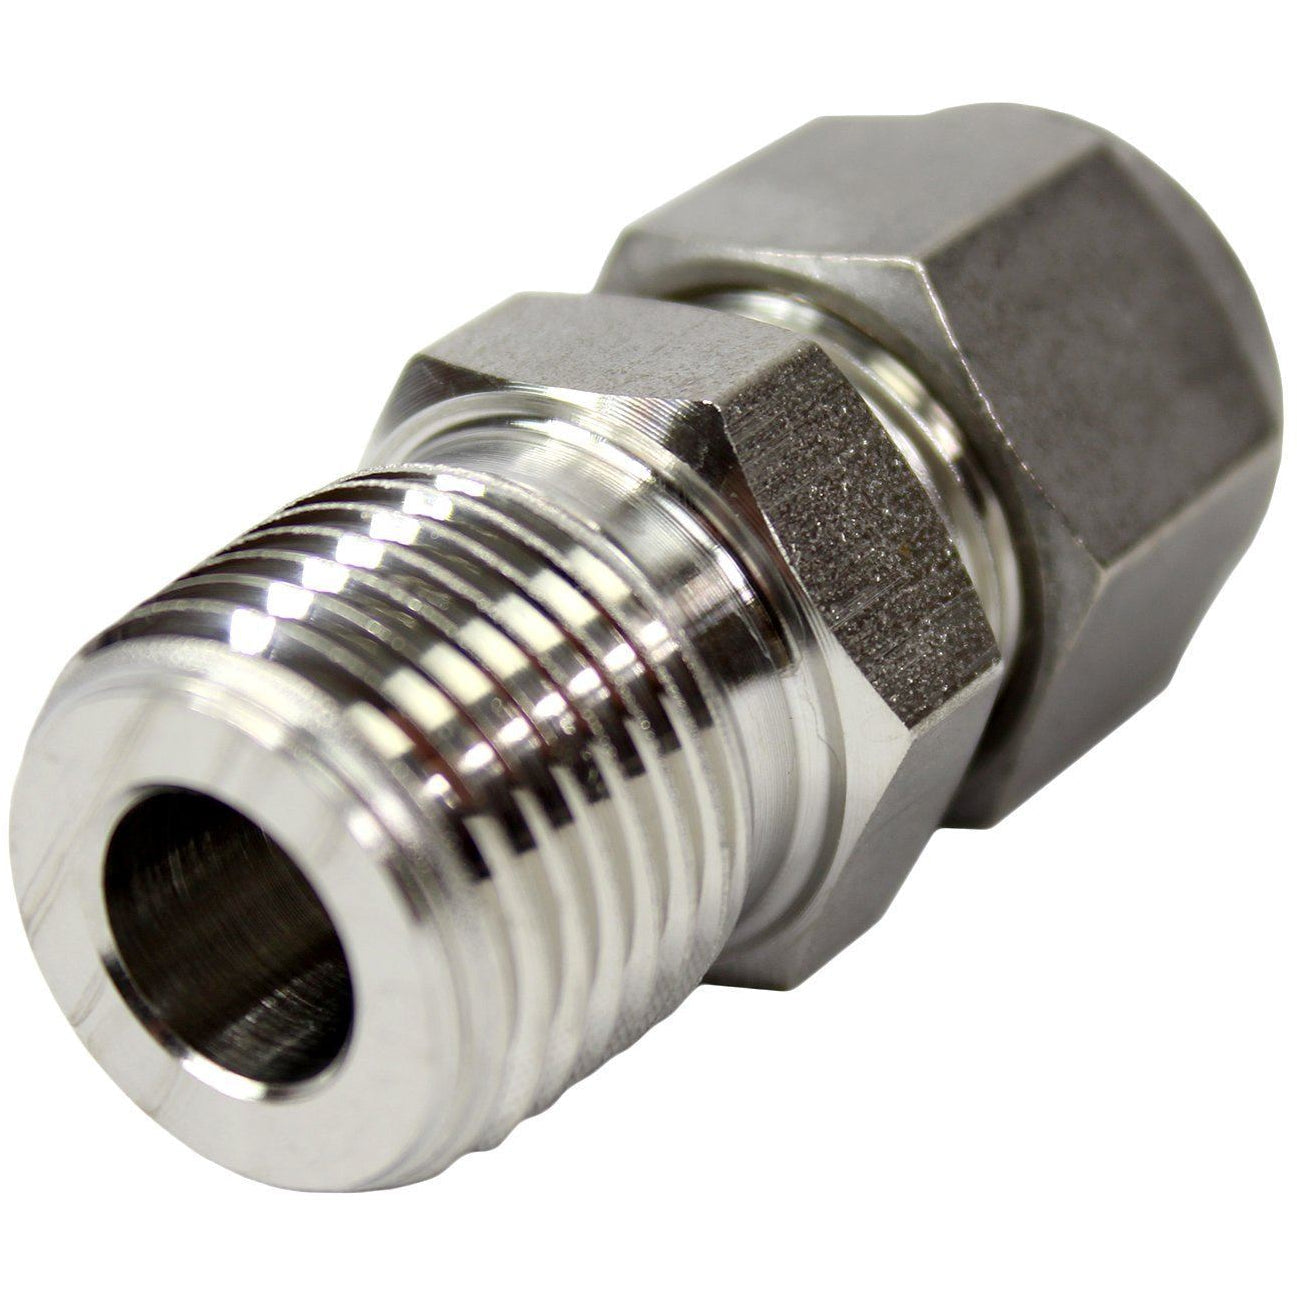 SSP Corporation Male Connector